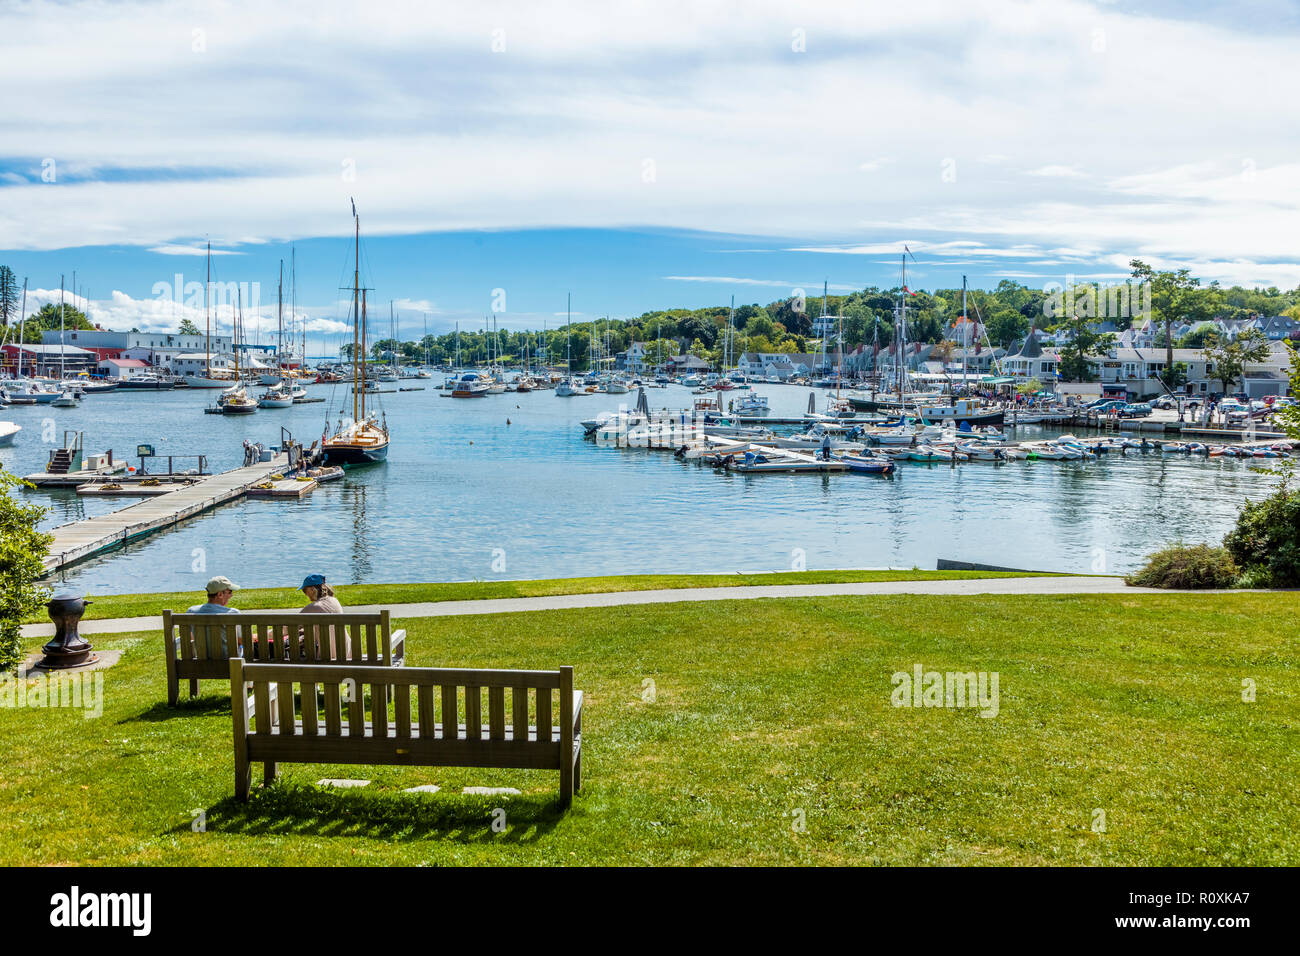 Harbor in tourist town of Camden on the Atlantic Ocean coast of Maine, United States Stock Photo